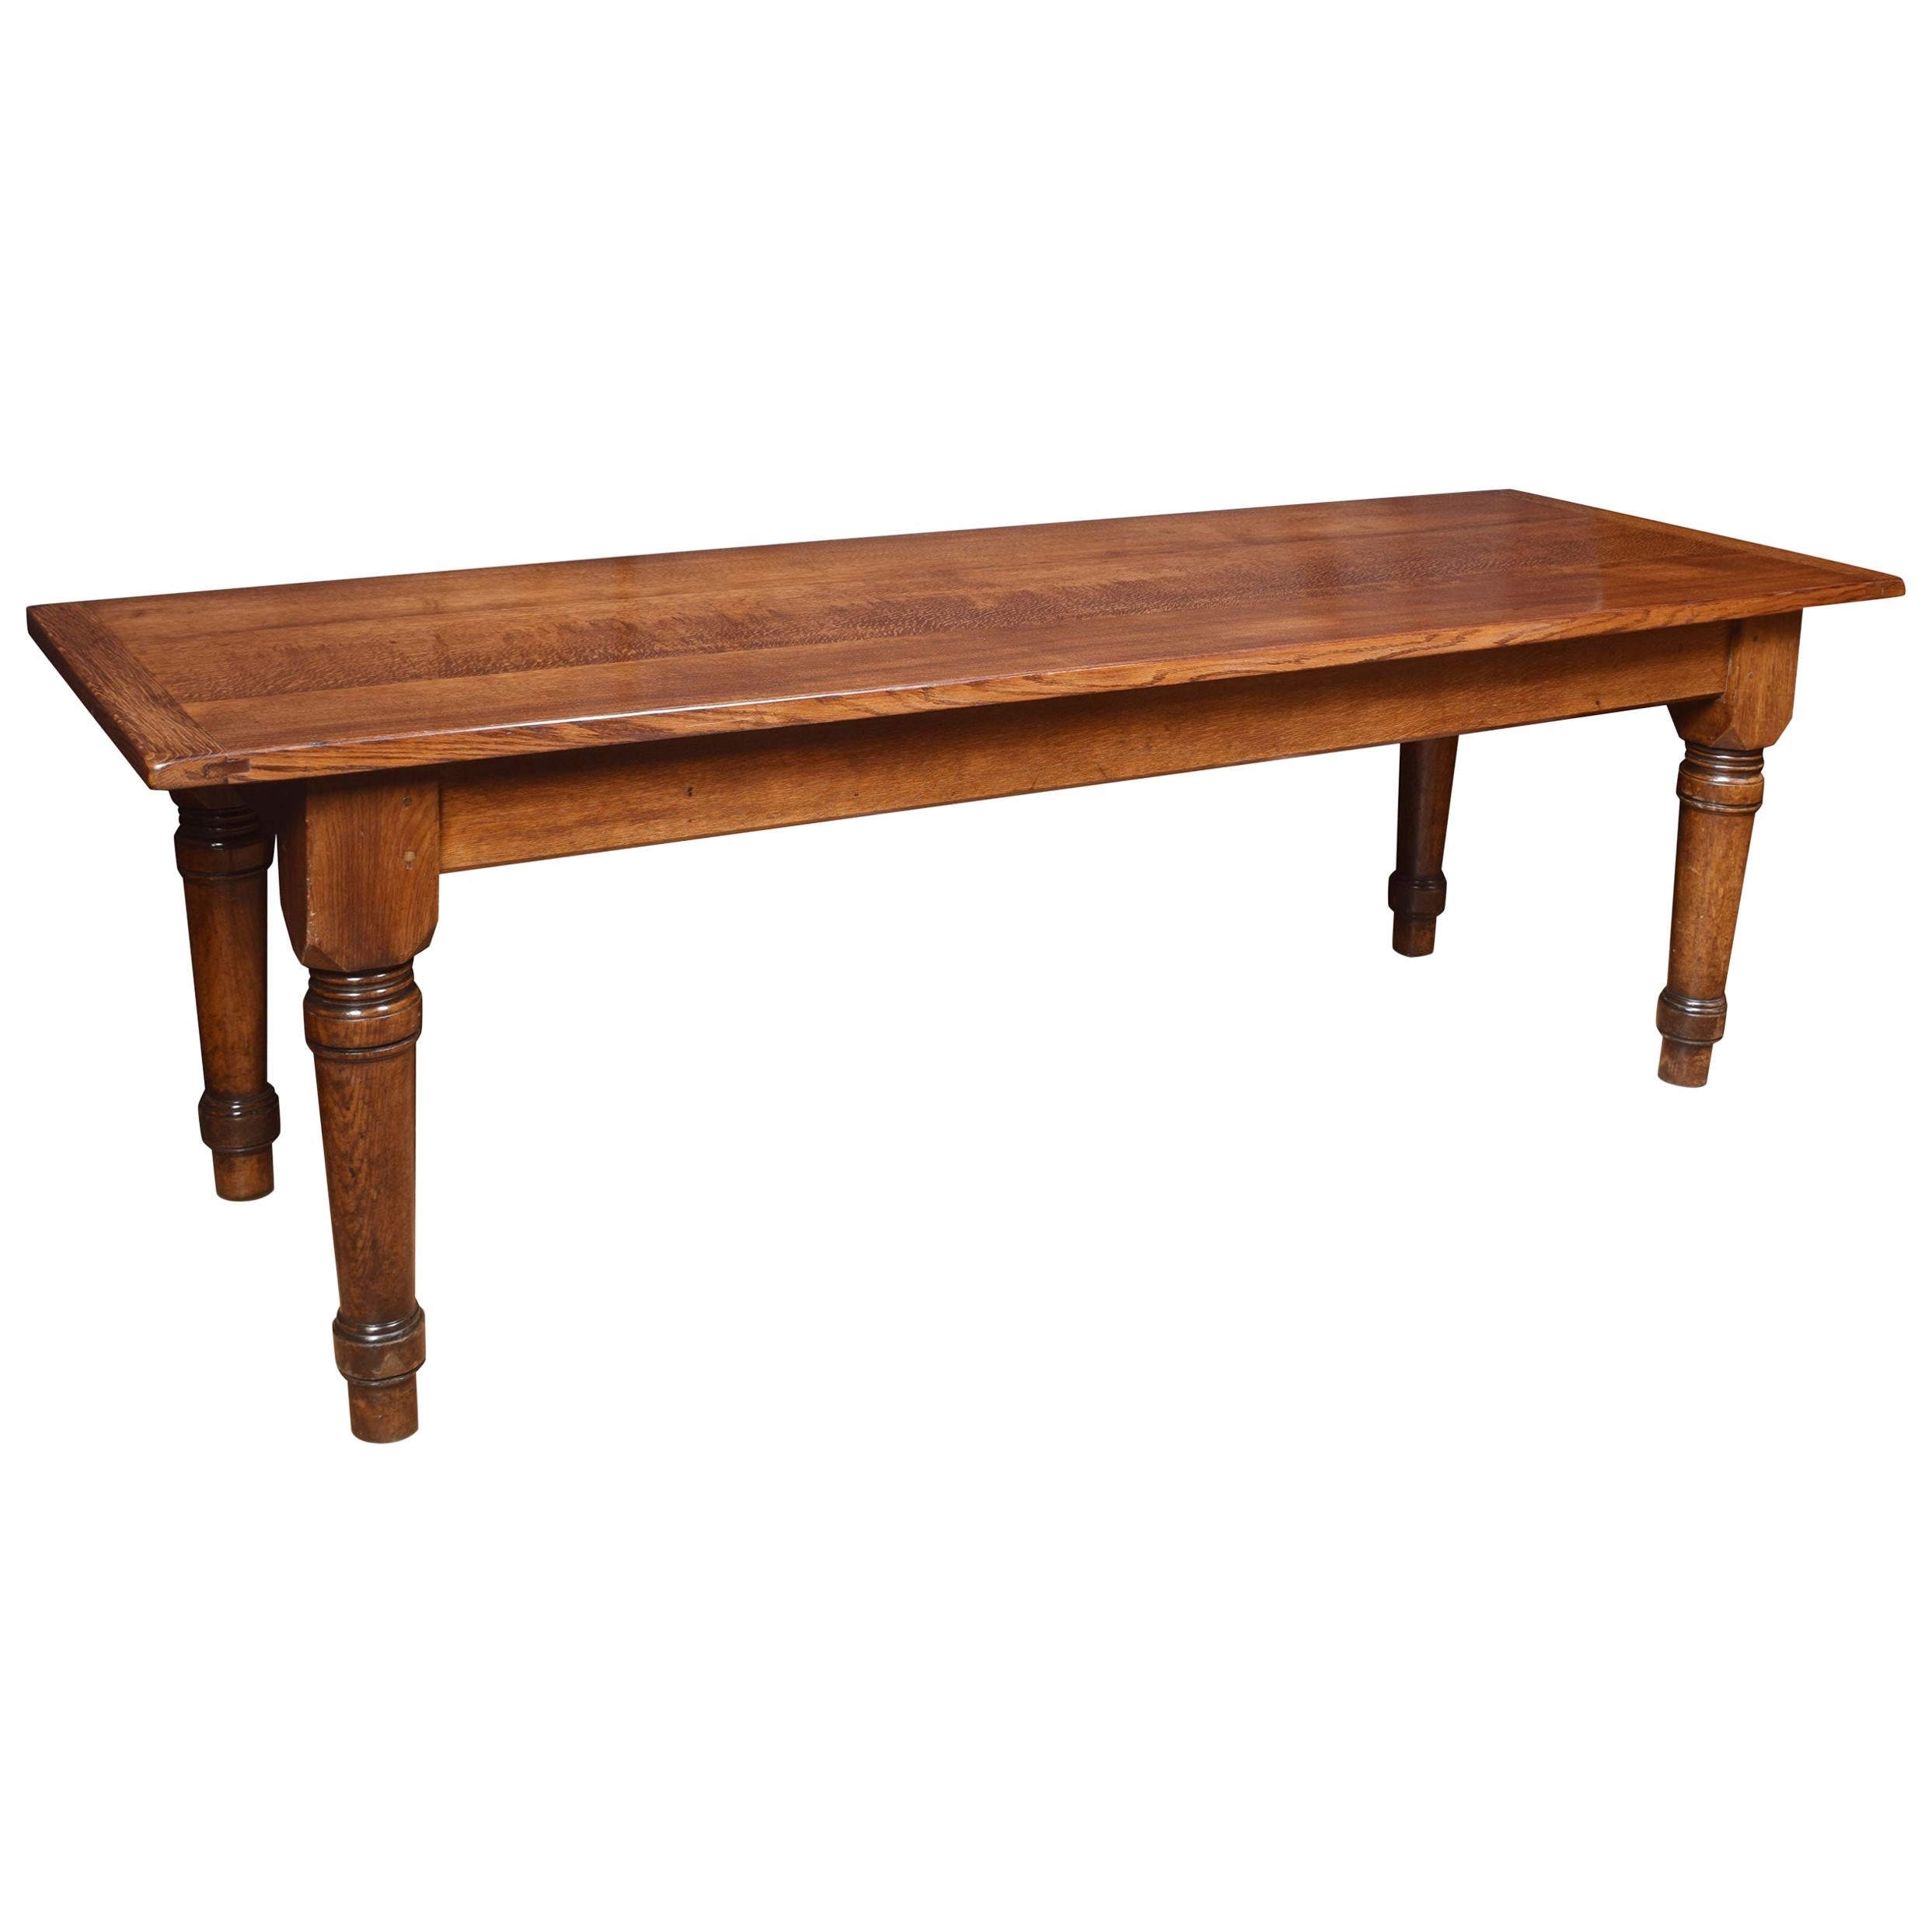 Large Oak Kitchen Dining Refectory Table